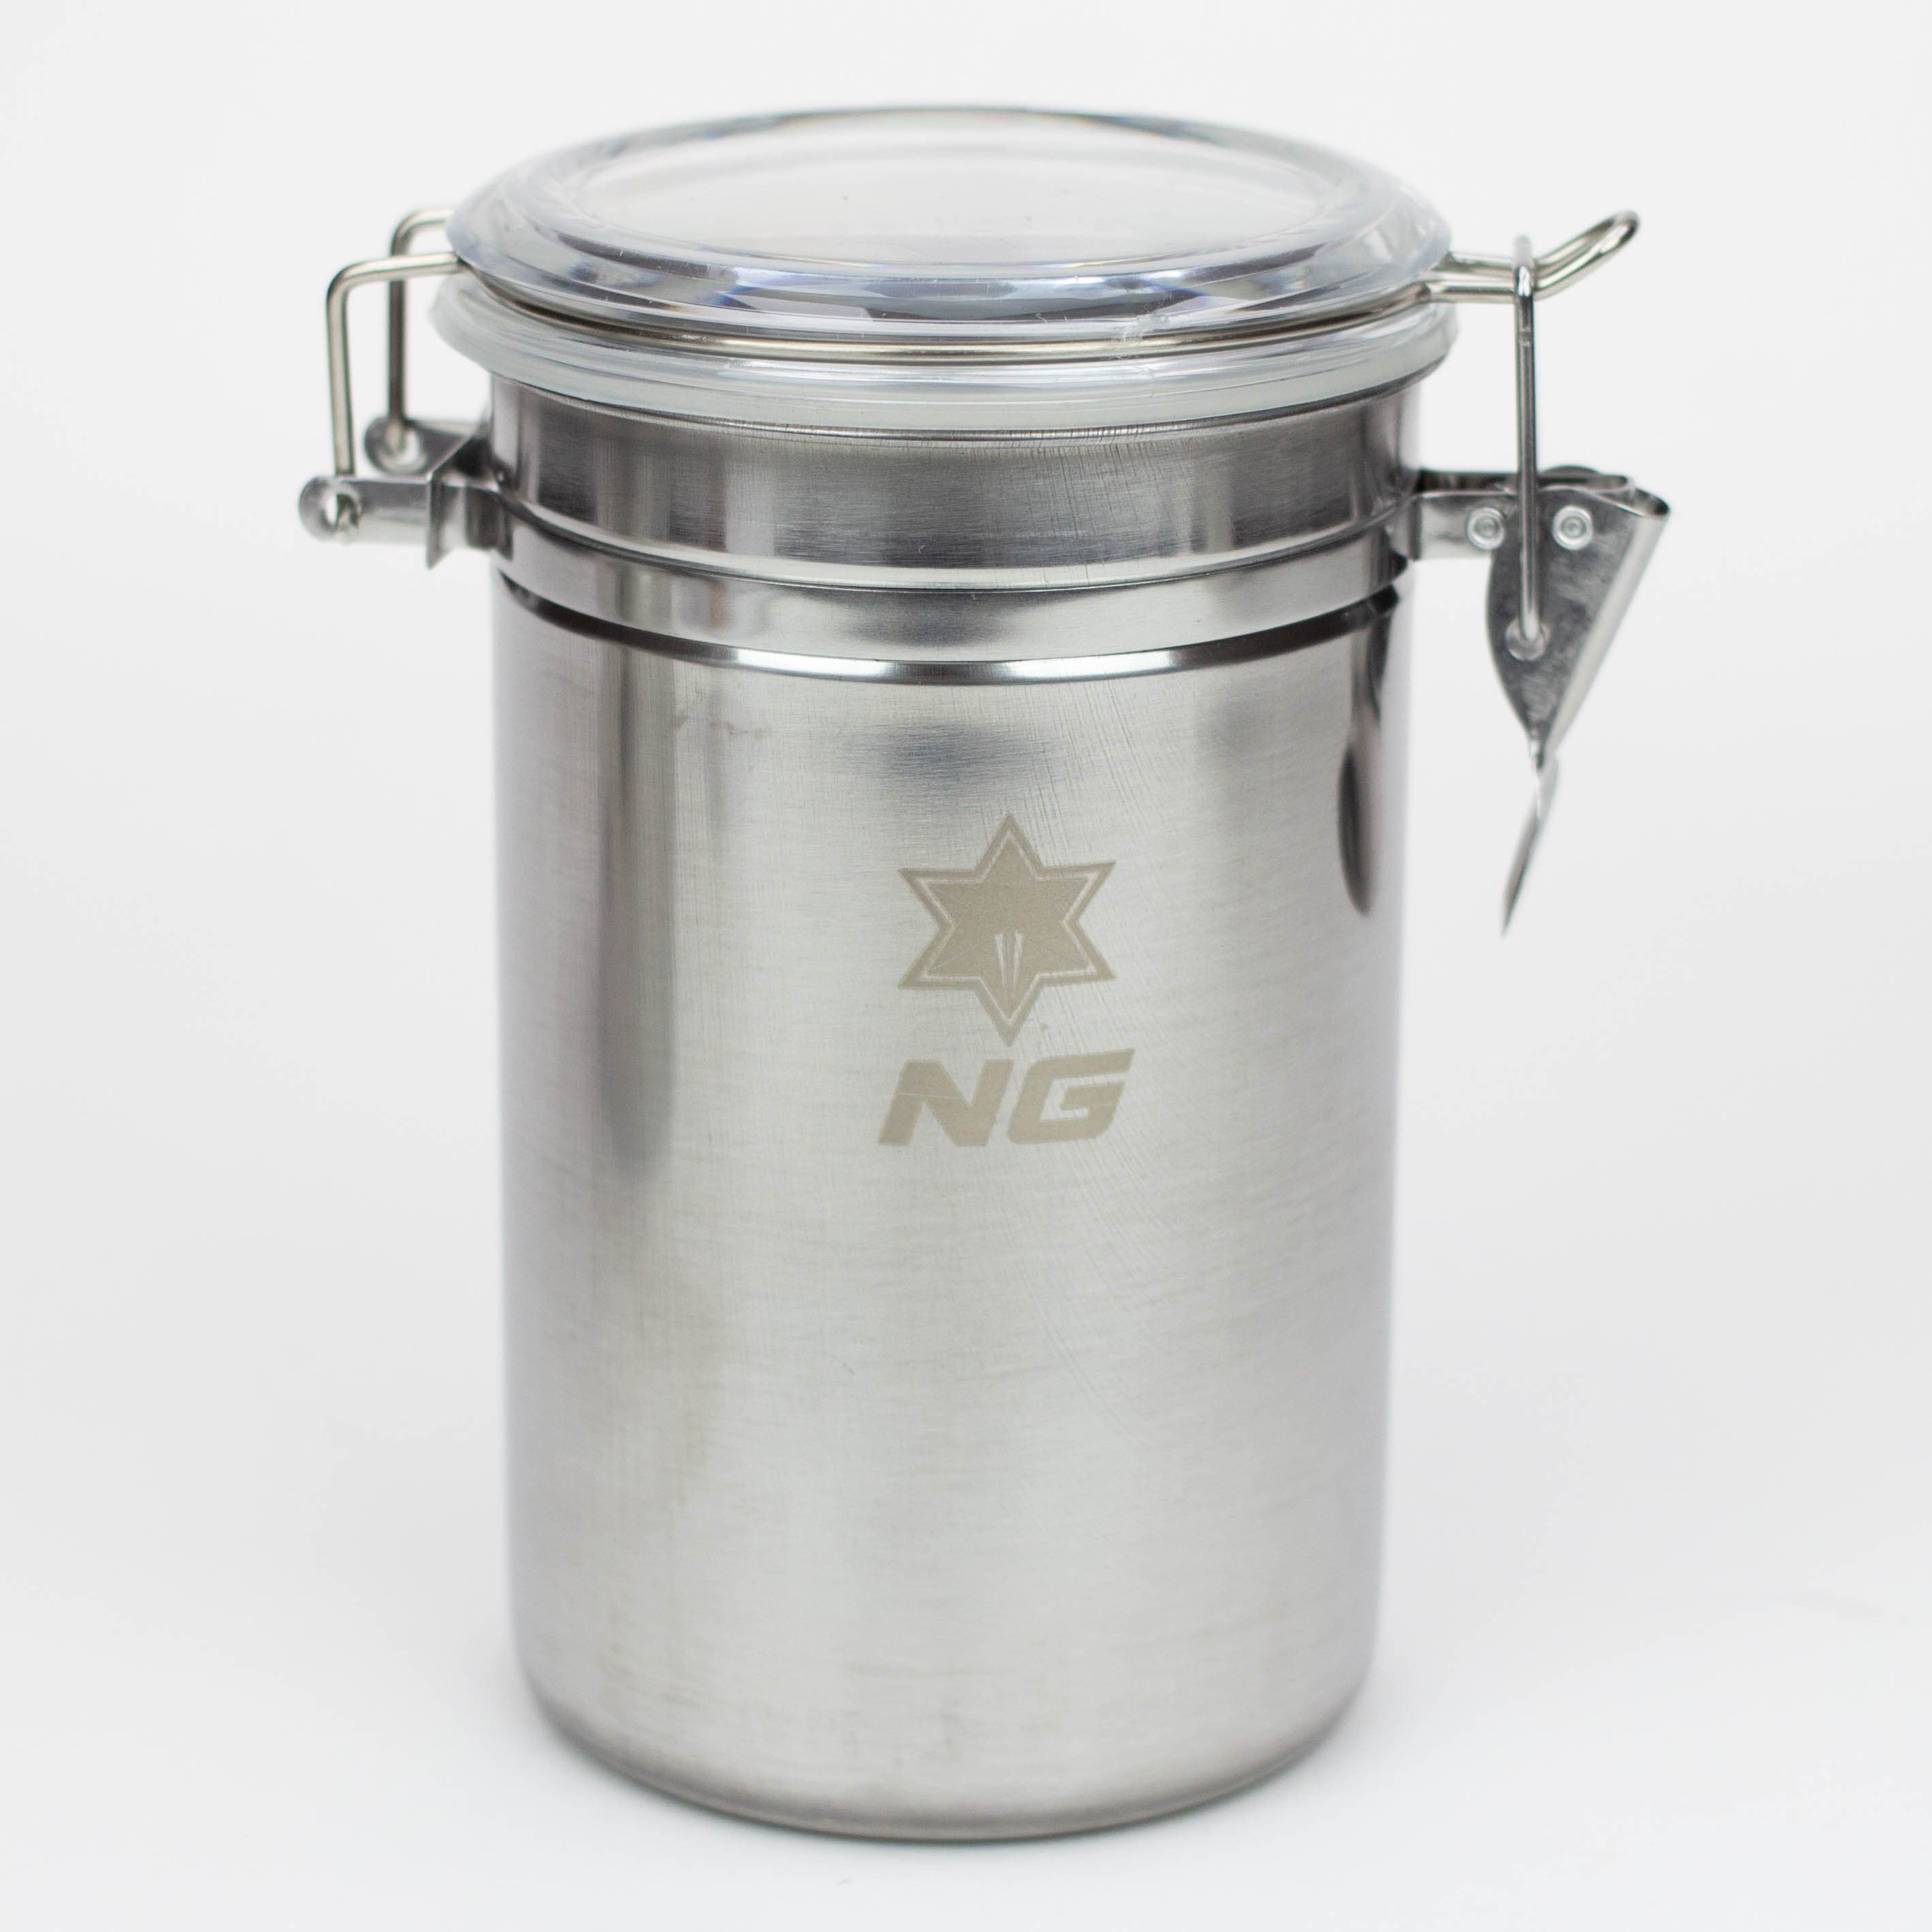 Stainless Metal Canister_2